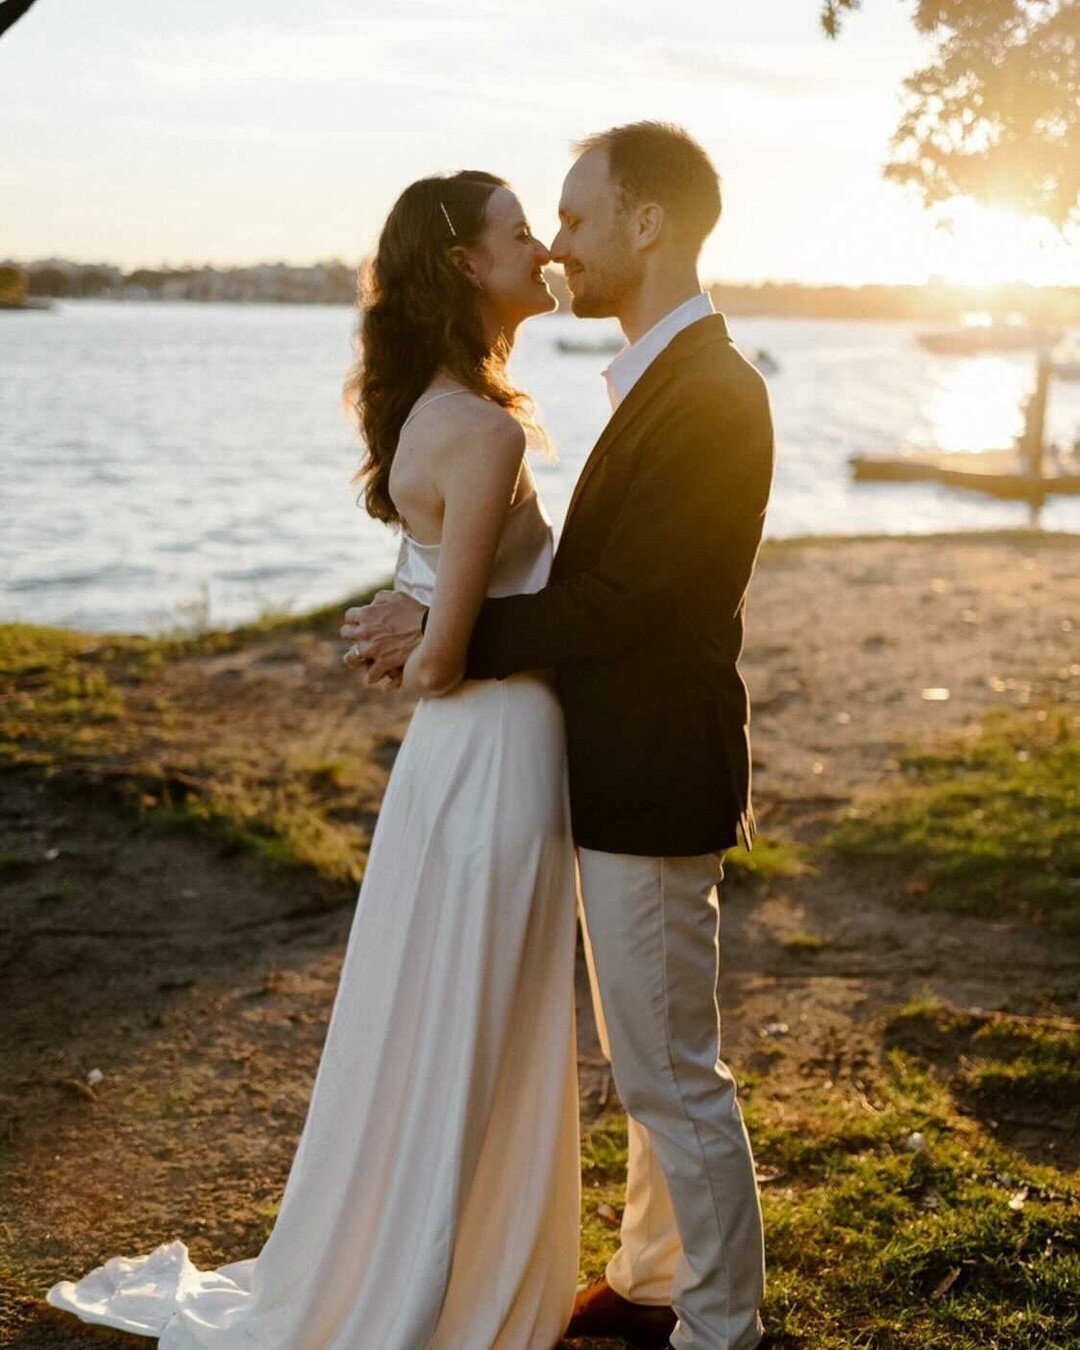 We love love.
Throwback to Alison &amp; Richard's Wedding in 2021. 
Hair &amp; Makeup by Rema and Raheleh from Purely Polished.

#huntershillsailingclub #huntershillsailingclubwedding #huntershillwedding #sydneywedding #sydneyharbourwedding #oliversm